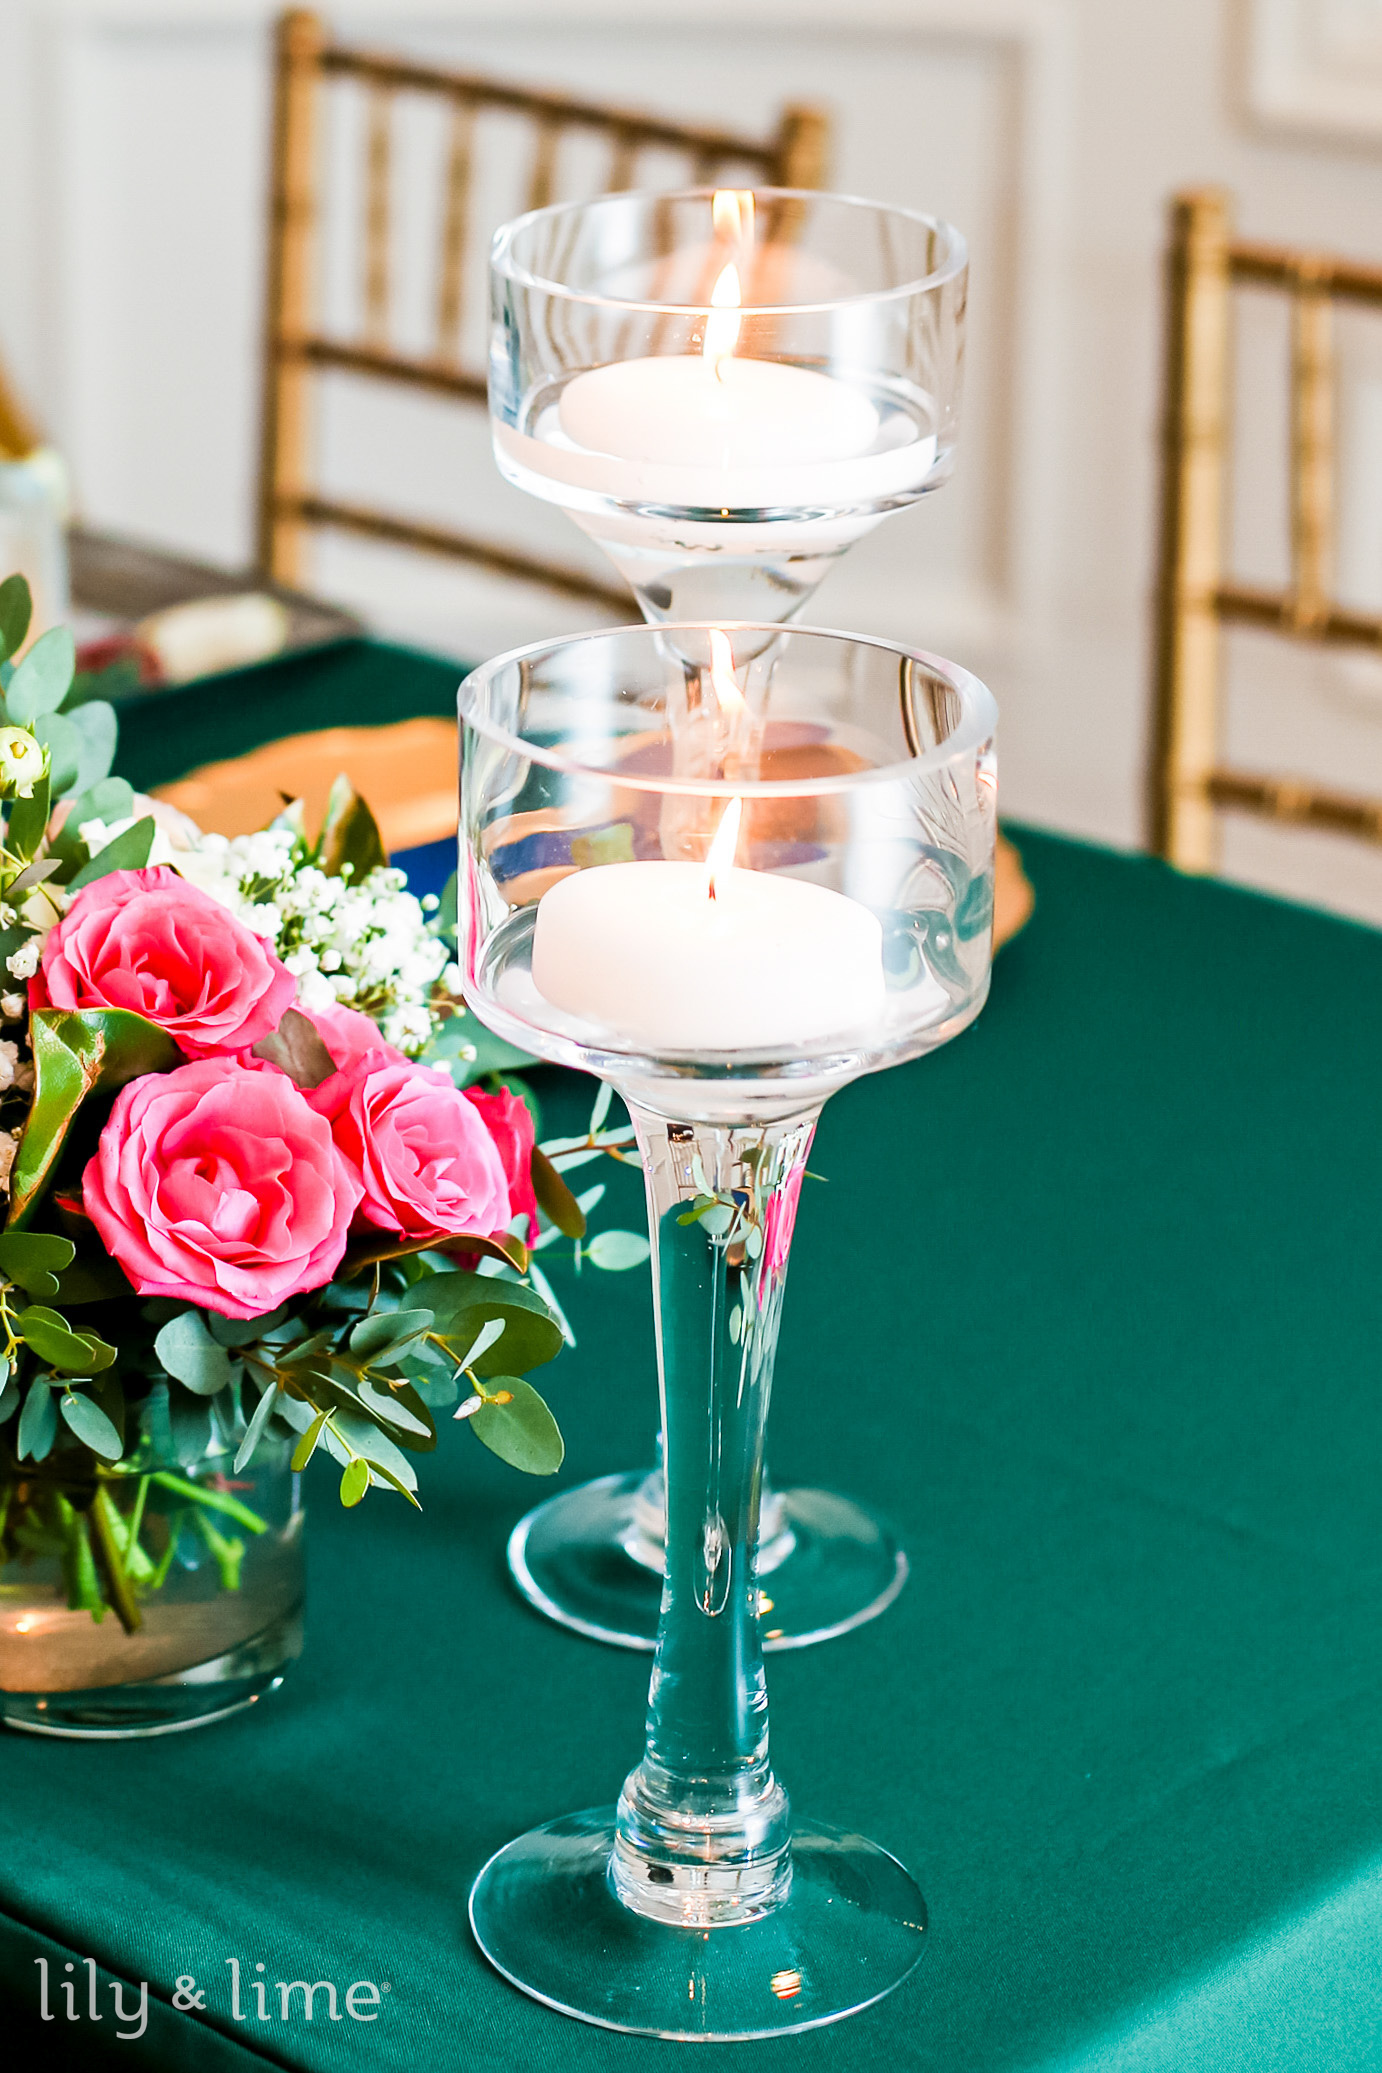 Candlelight Centerpiece Ideas To Light Up Your Wedding Reception